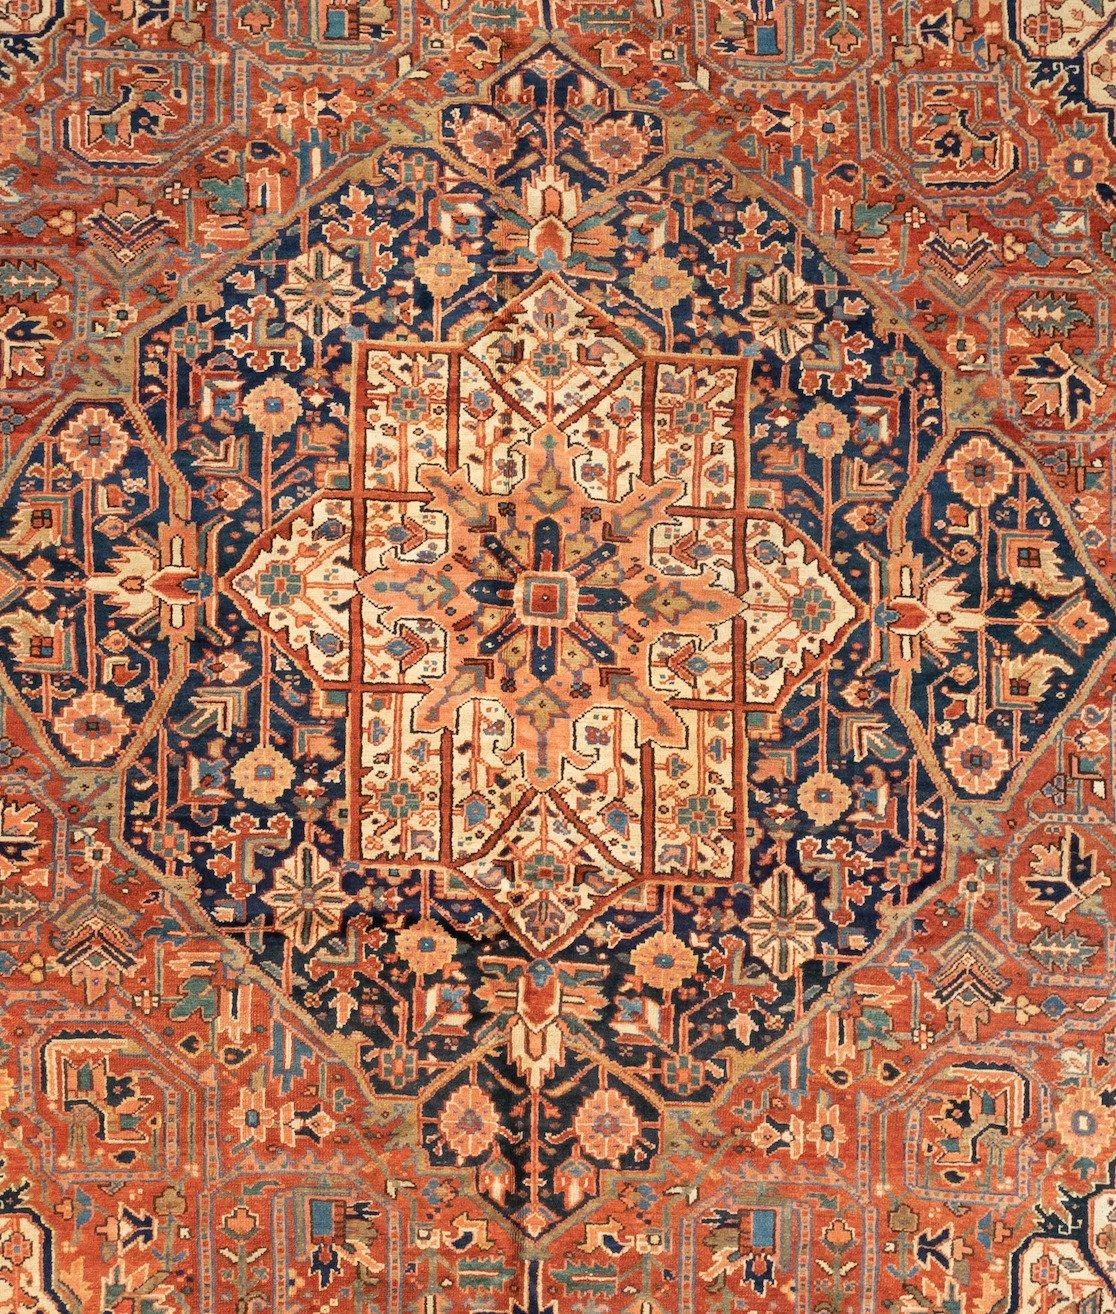 Antique Karaja (Black Mountain) rugs are woven in Iran near the Caucasian border and therefore exhibit Caucasian styles and motifs. This carpet measures 9.7 x 11.8 ft and is from circa 1930-1940.